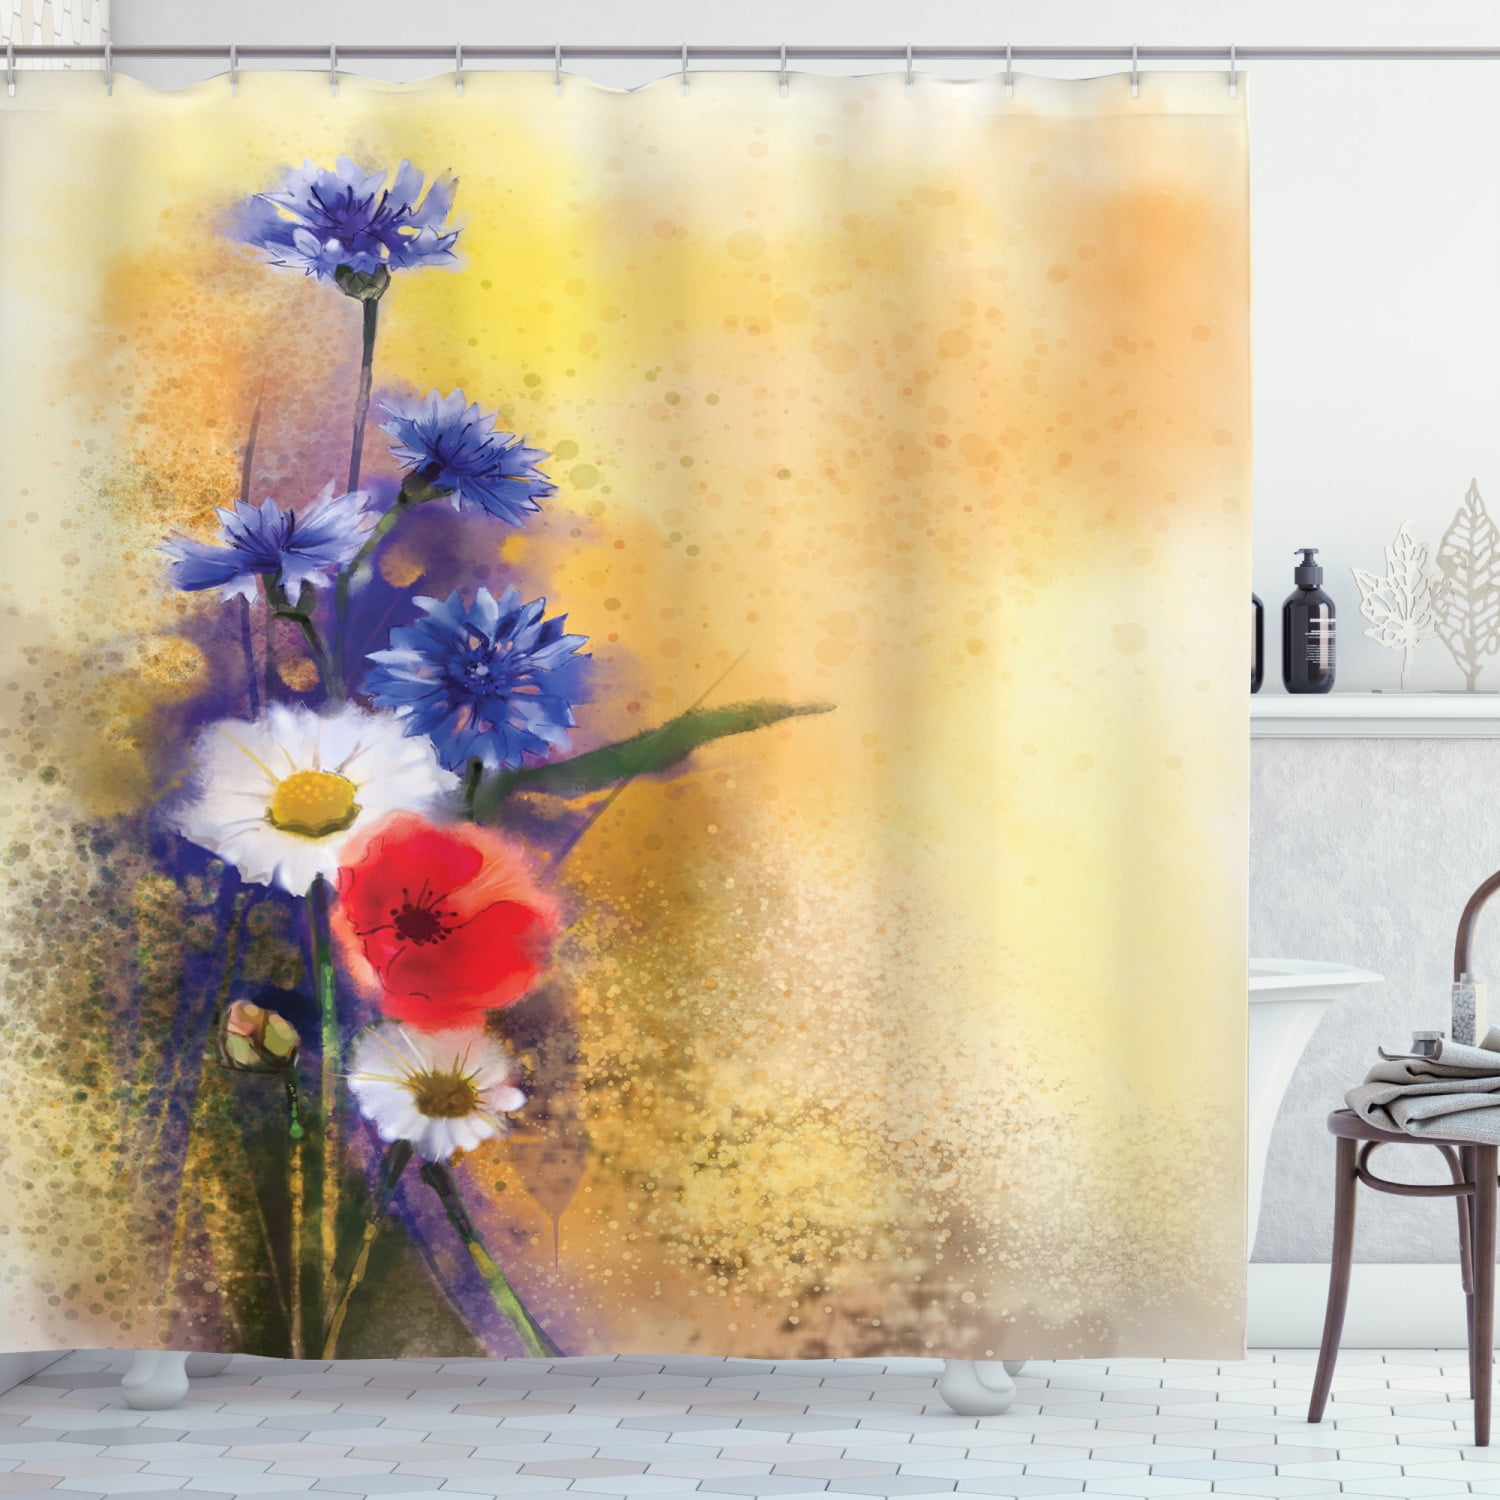 Floral Shower Curtain Blooming Flowers Artsy Print for Bathroom 71Inch Long 